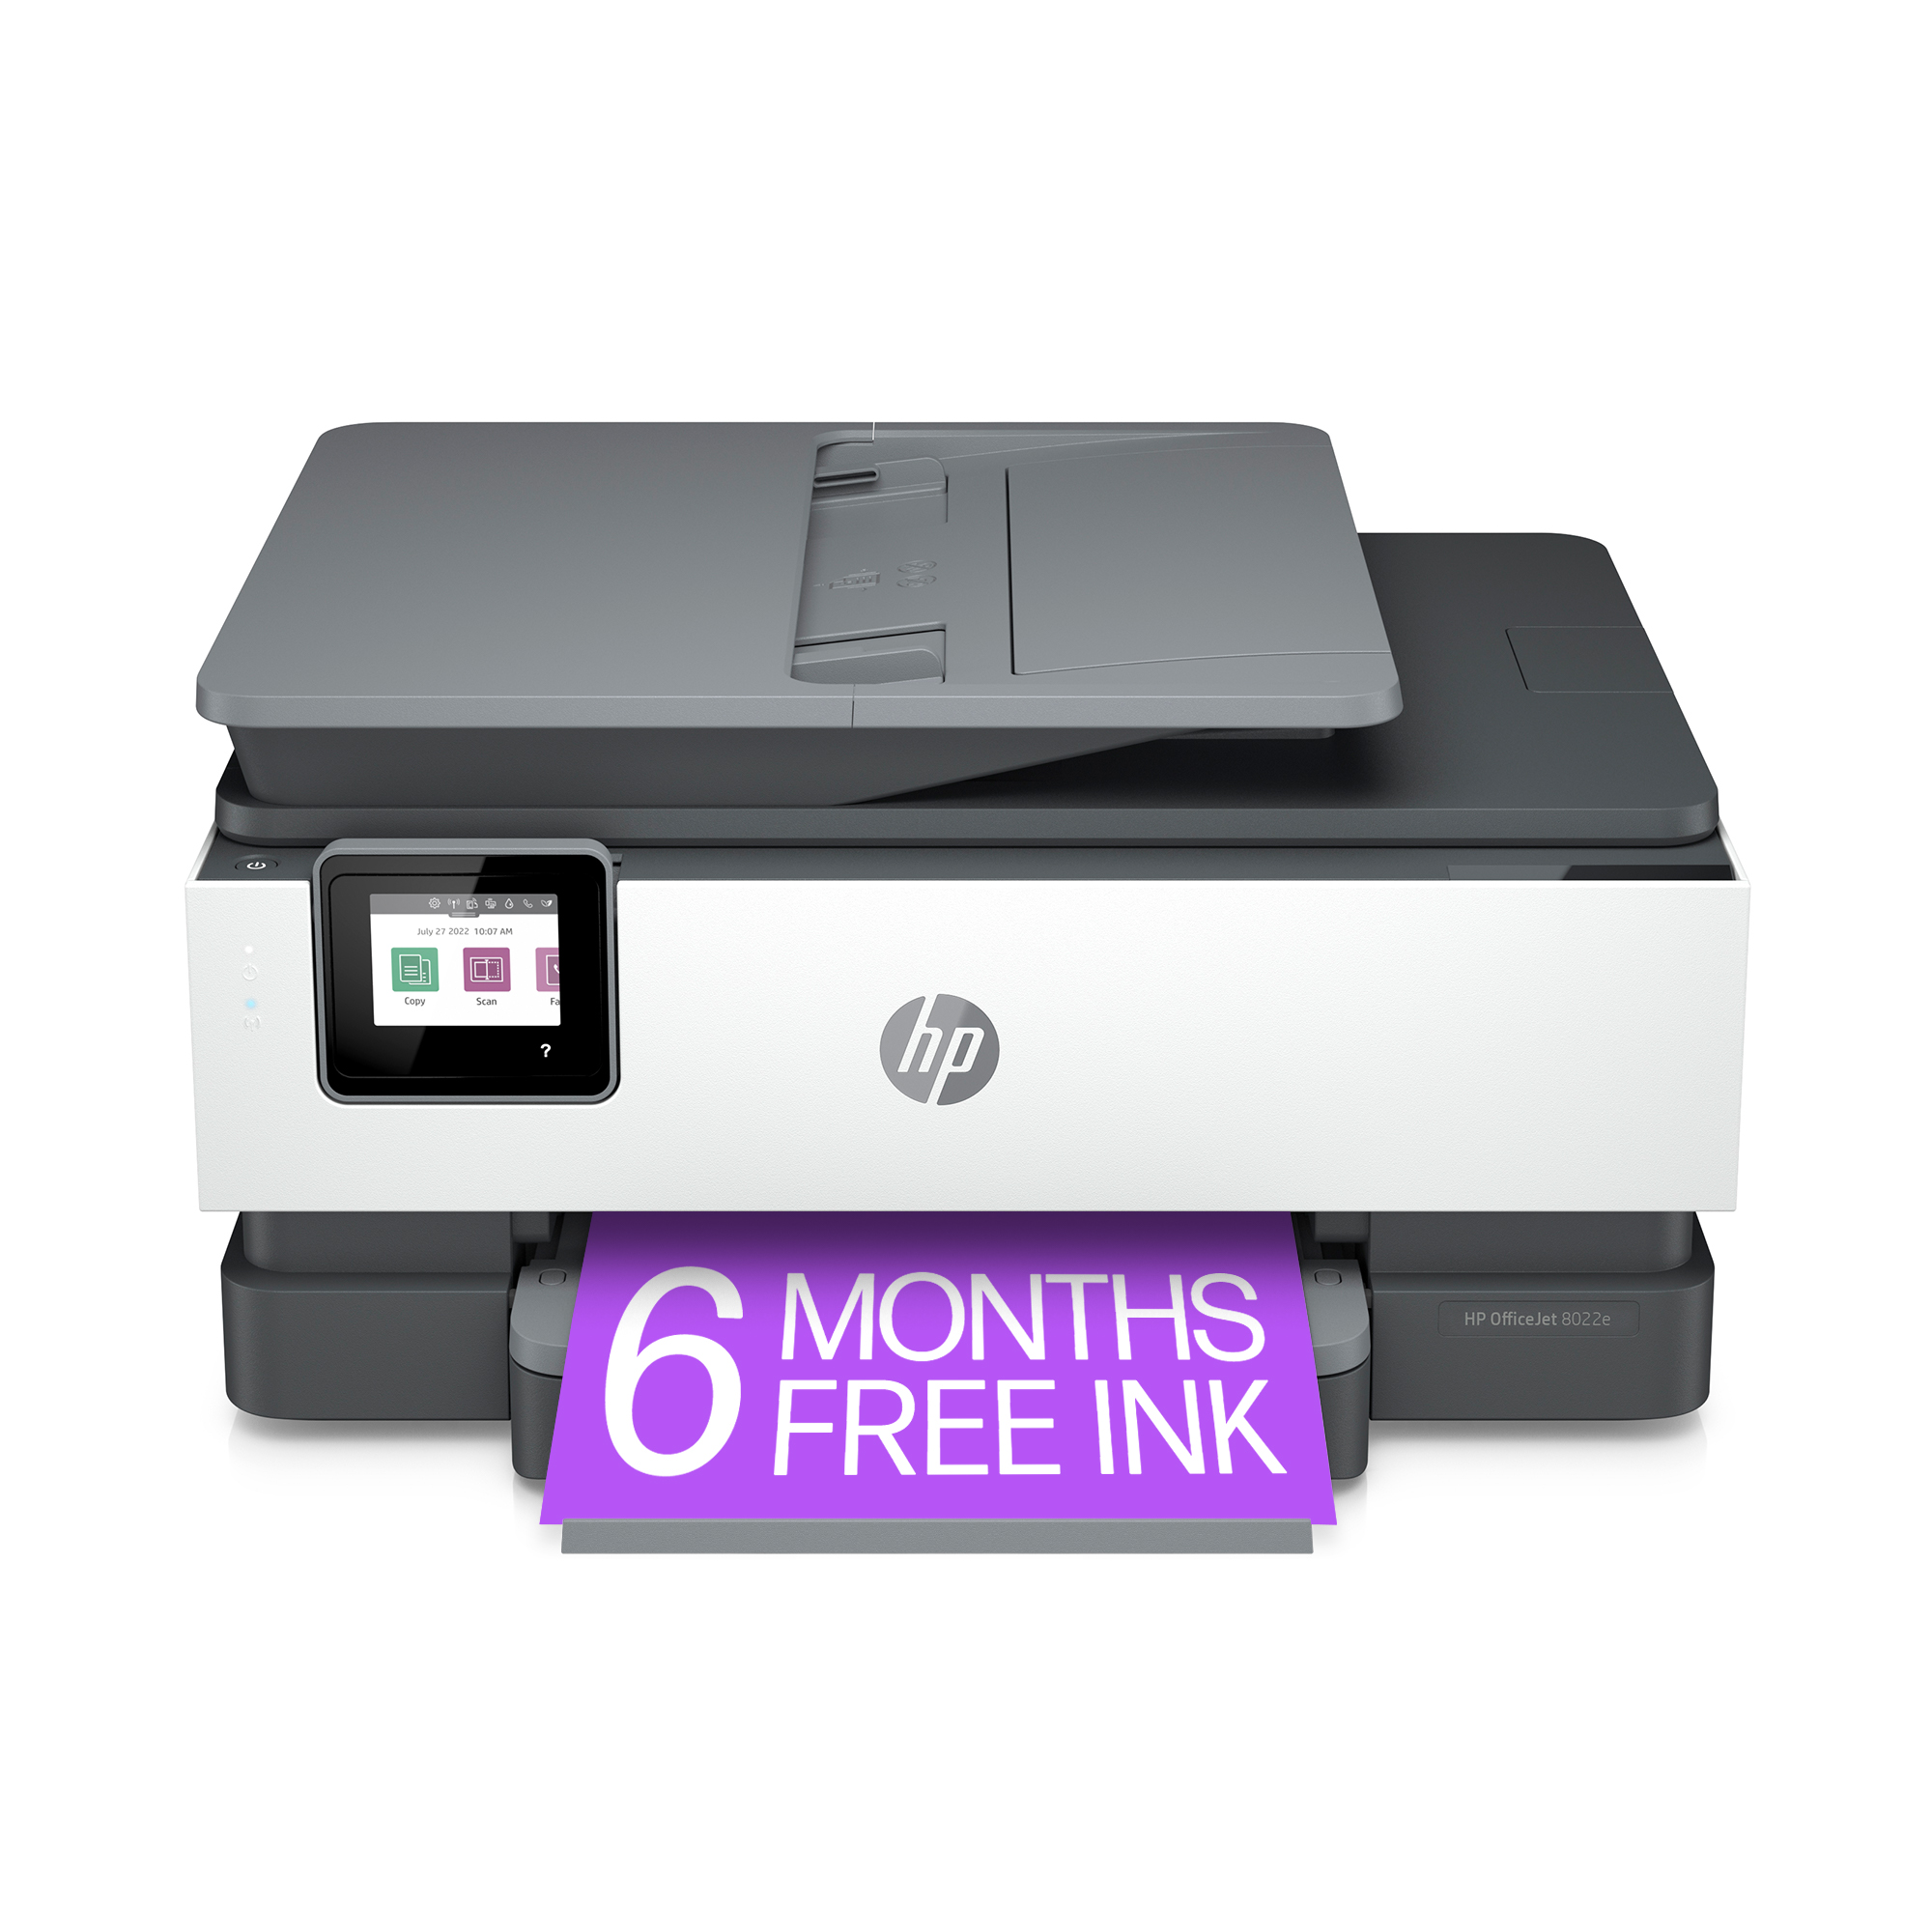 OfficeJet Color Months HP+ Free All-in-One with - HP Inkjet 8022e Ink Instant 6 Printer Wireless